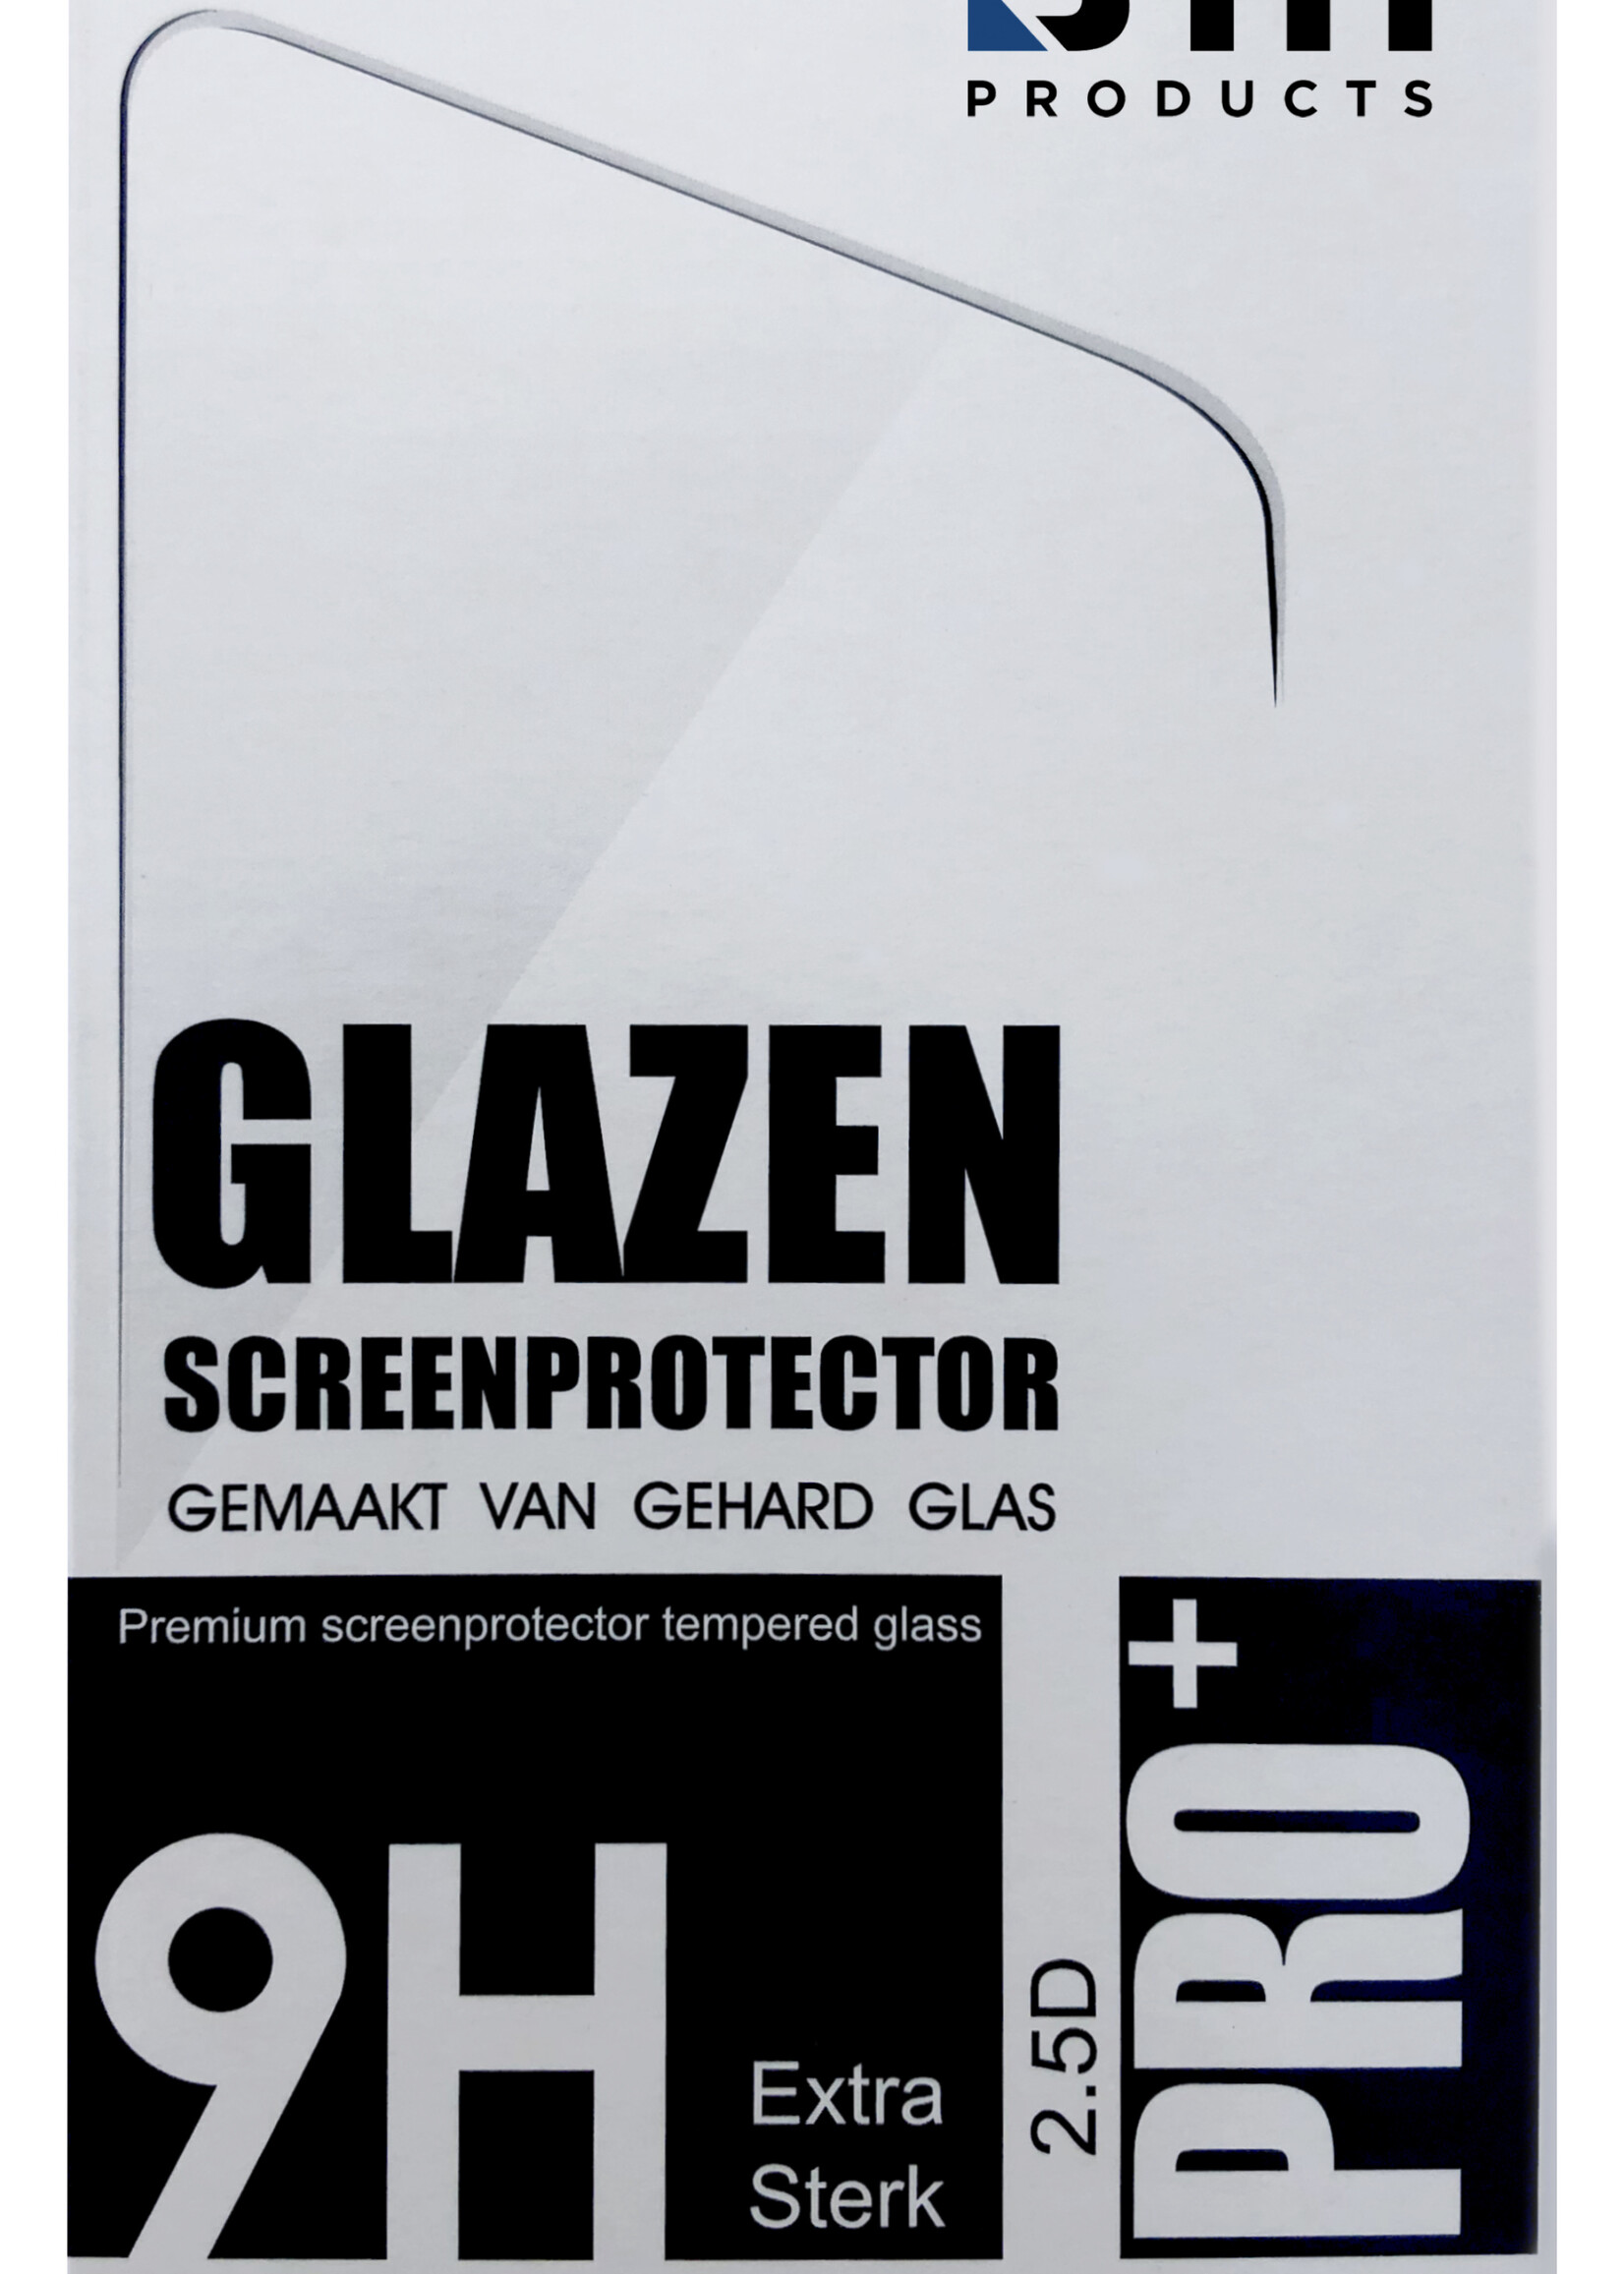 BTH Screenprotector Geschikt voor Samsung S21 Screenprotector Privacy Glas Gehard Full Cover - Screenprotector Geschikt voor Samsung Galaxy S21 Screenprotector Privacy Tempered Glass - 3 PACK